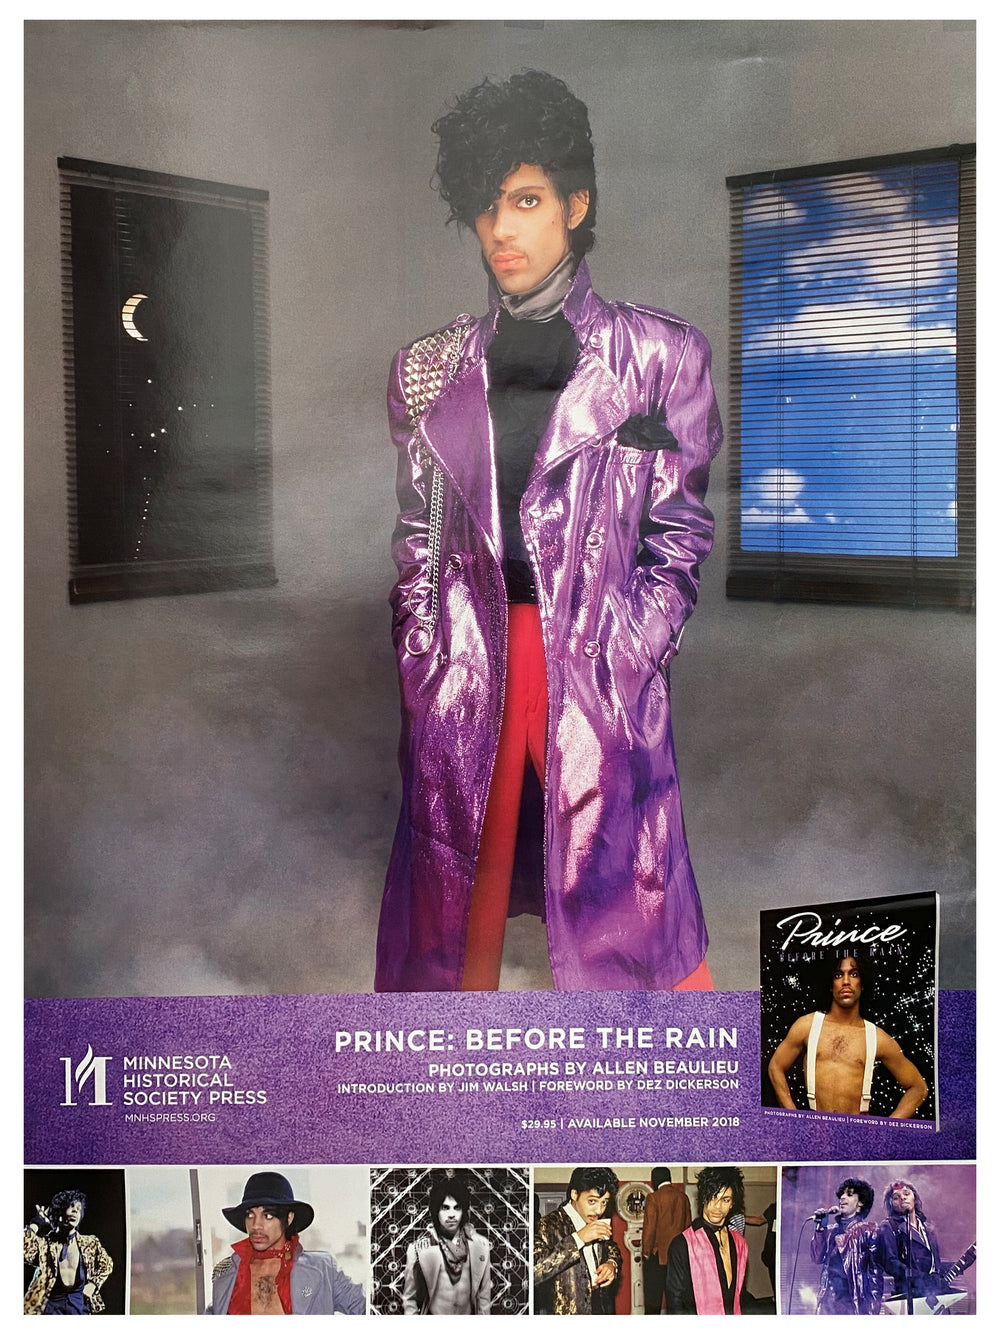 Prince – Official Promotional Poster Brand New USA 18 x 24